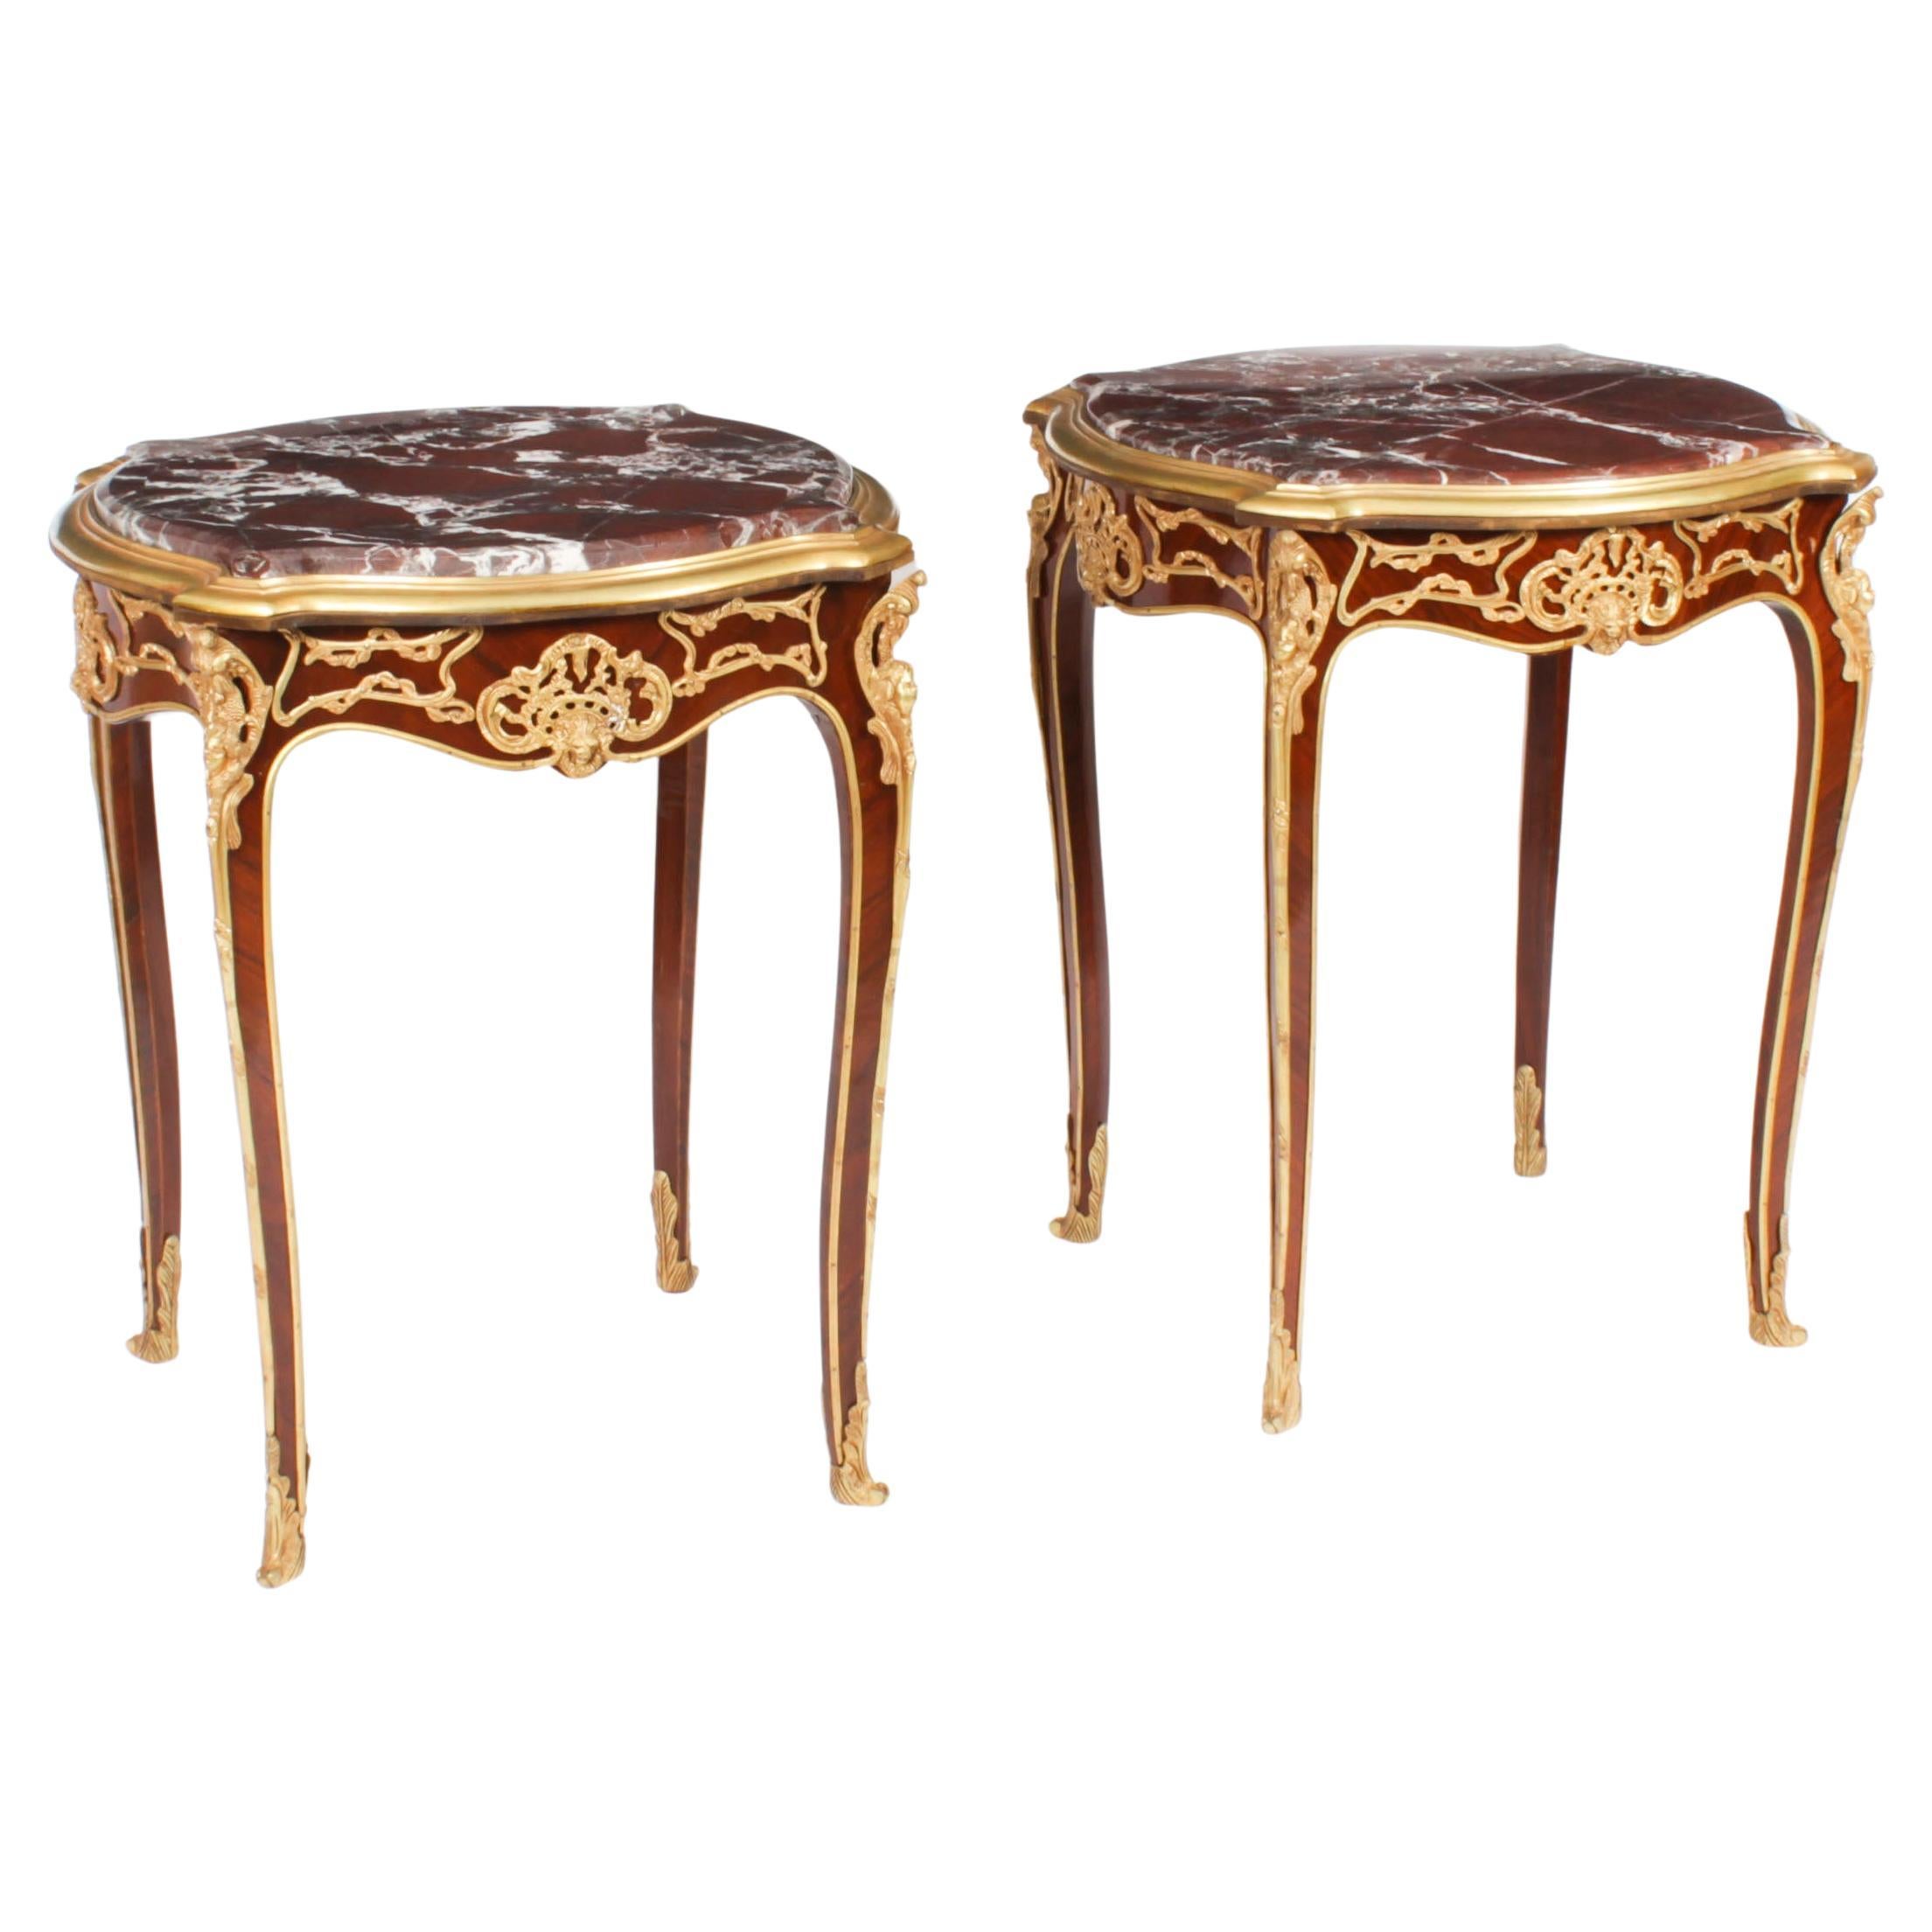 Vintage Pair French Louis Revival Marble & Ormolu Occasional Tables 20th C For Sale